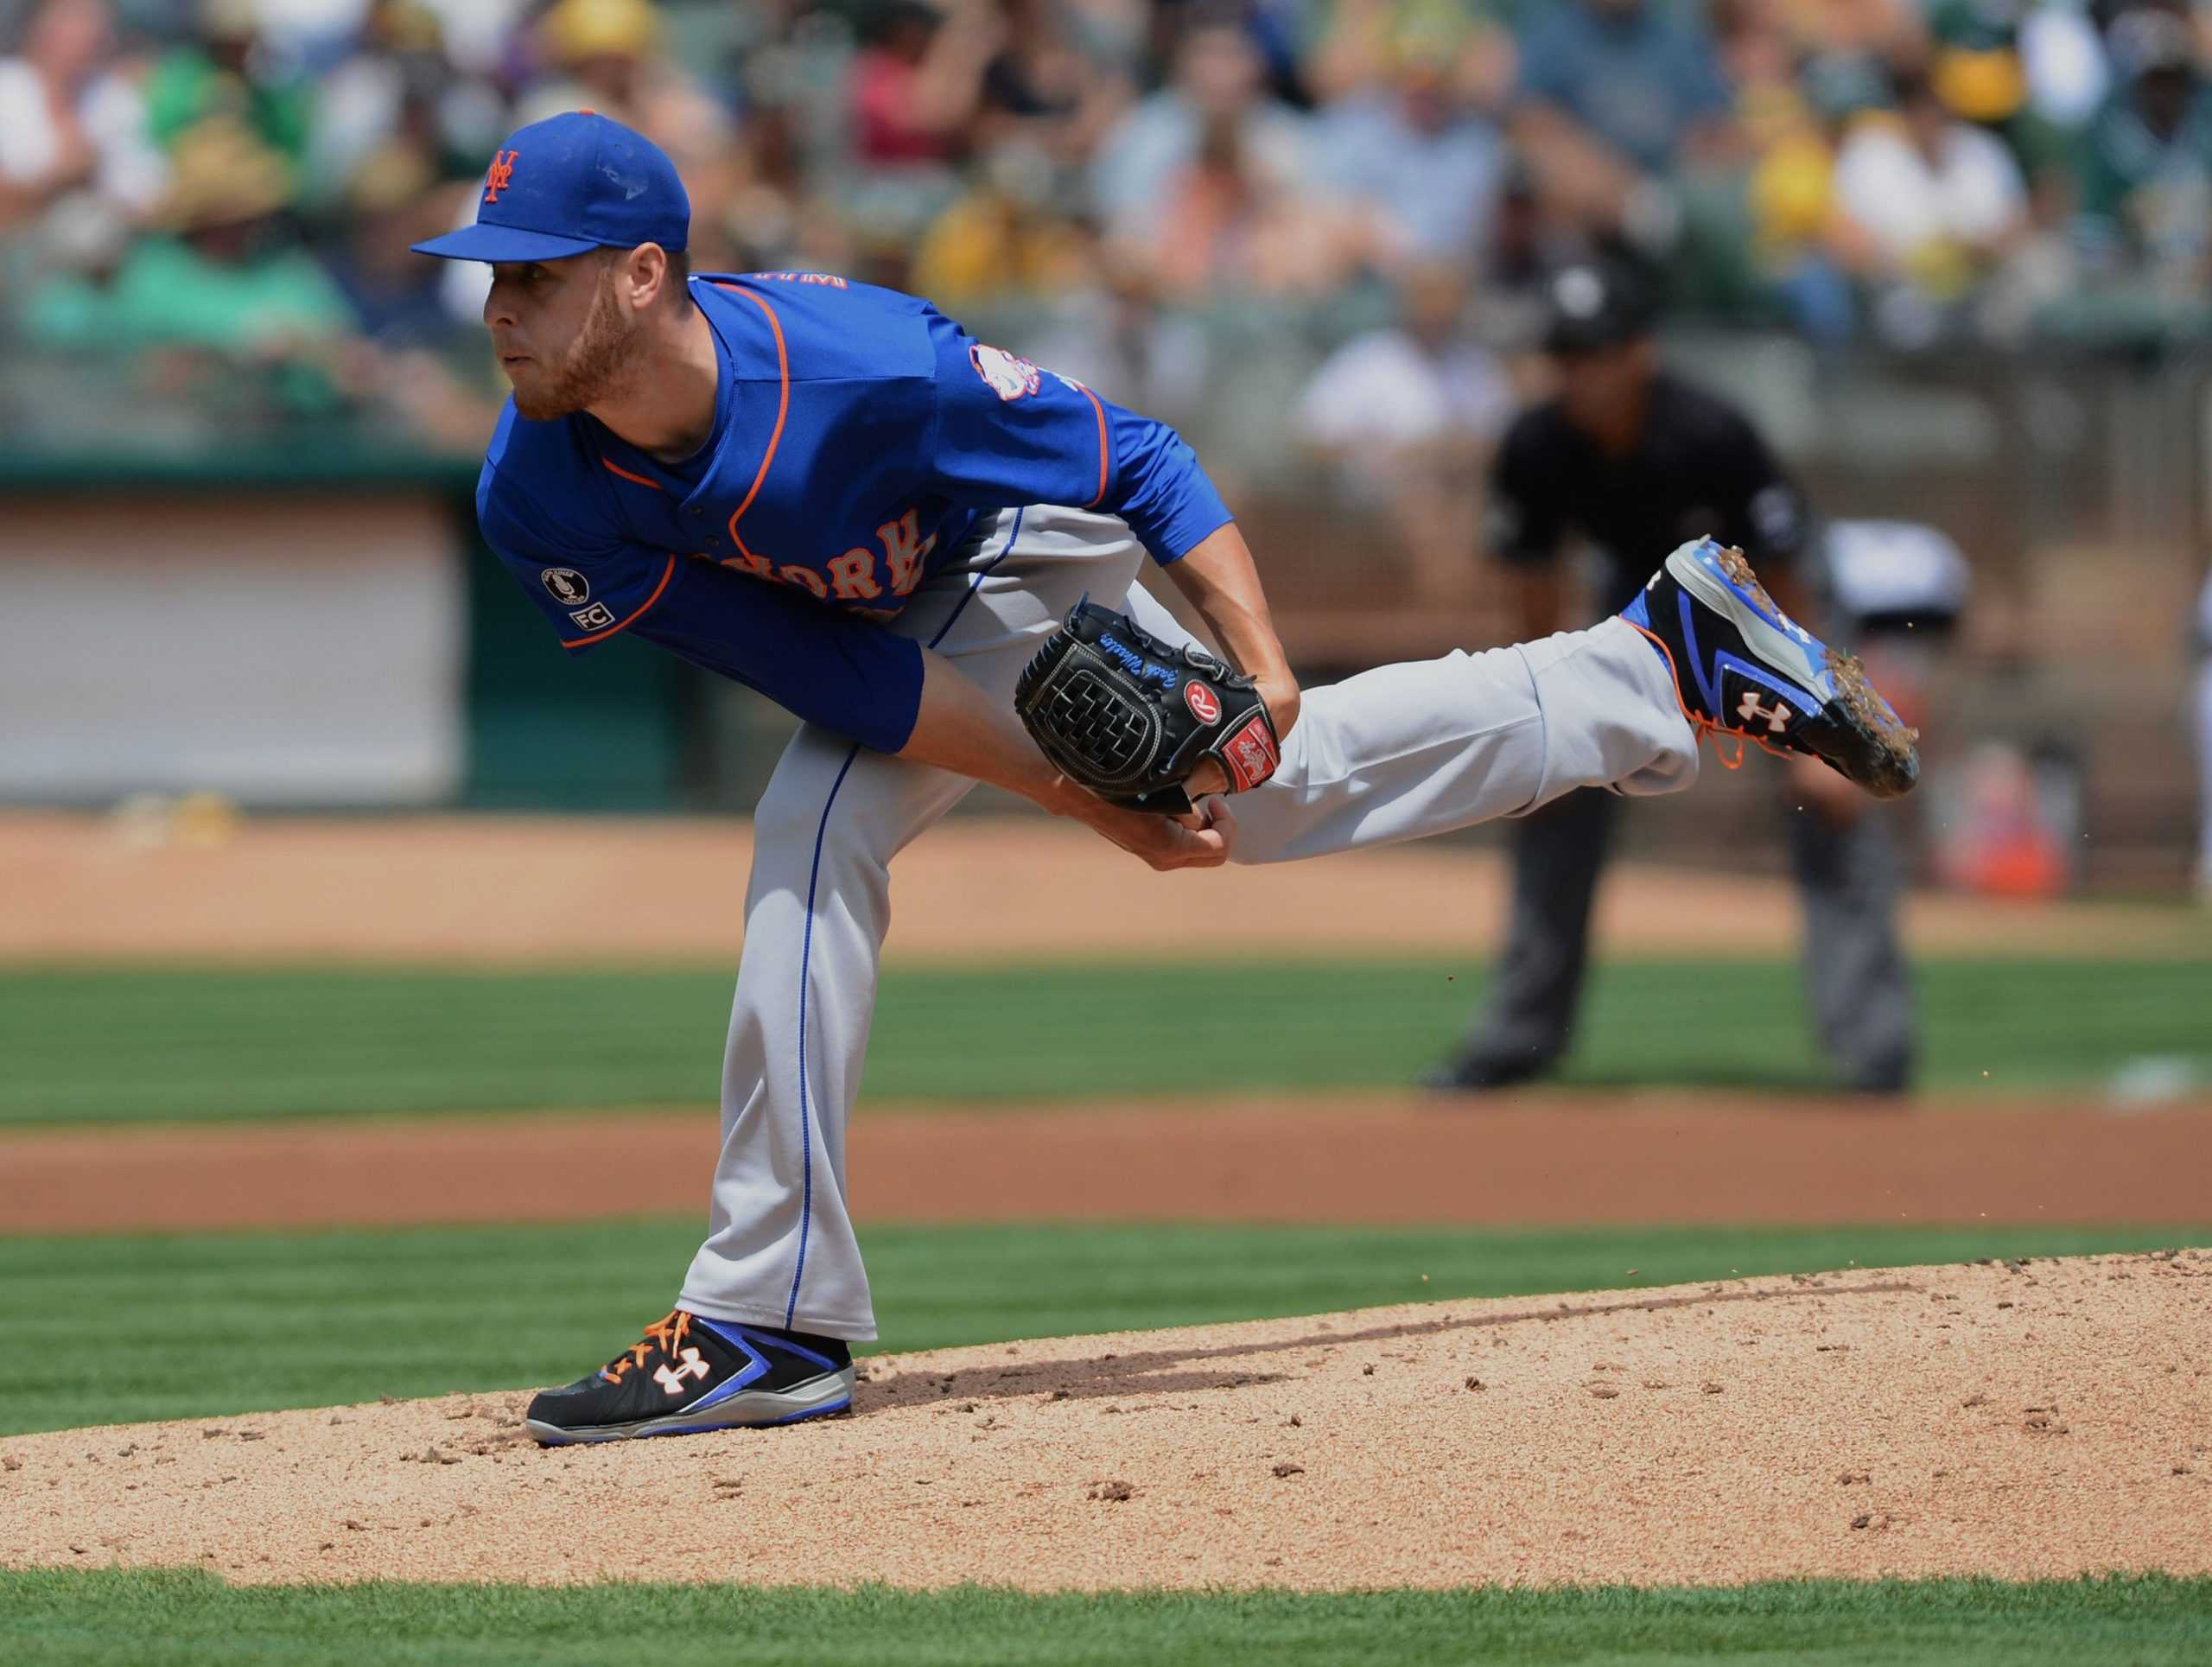 The New York Mets Zack Wheeler pitches against the Oakland Athletics in the first inning at O.co Coliseum in Oakland, Calif., on Wednesday, Aug. 20, 2014. (Dan Honda/Bay Area News Group/MCT)